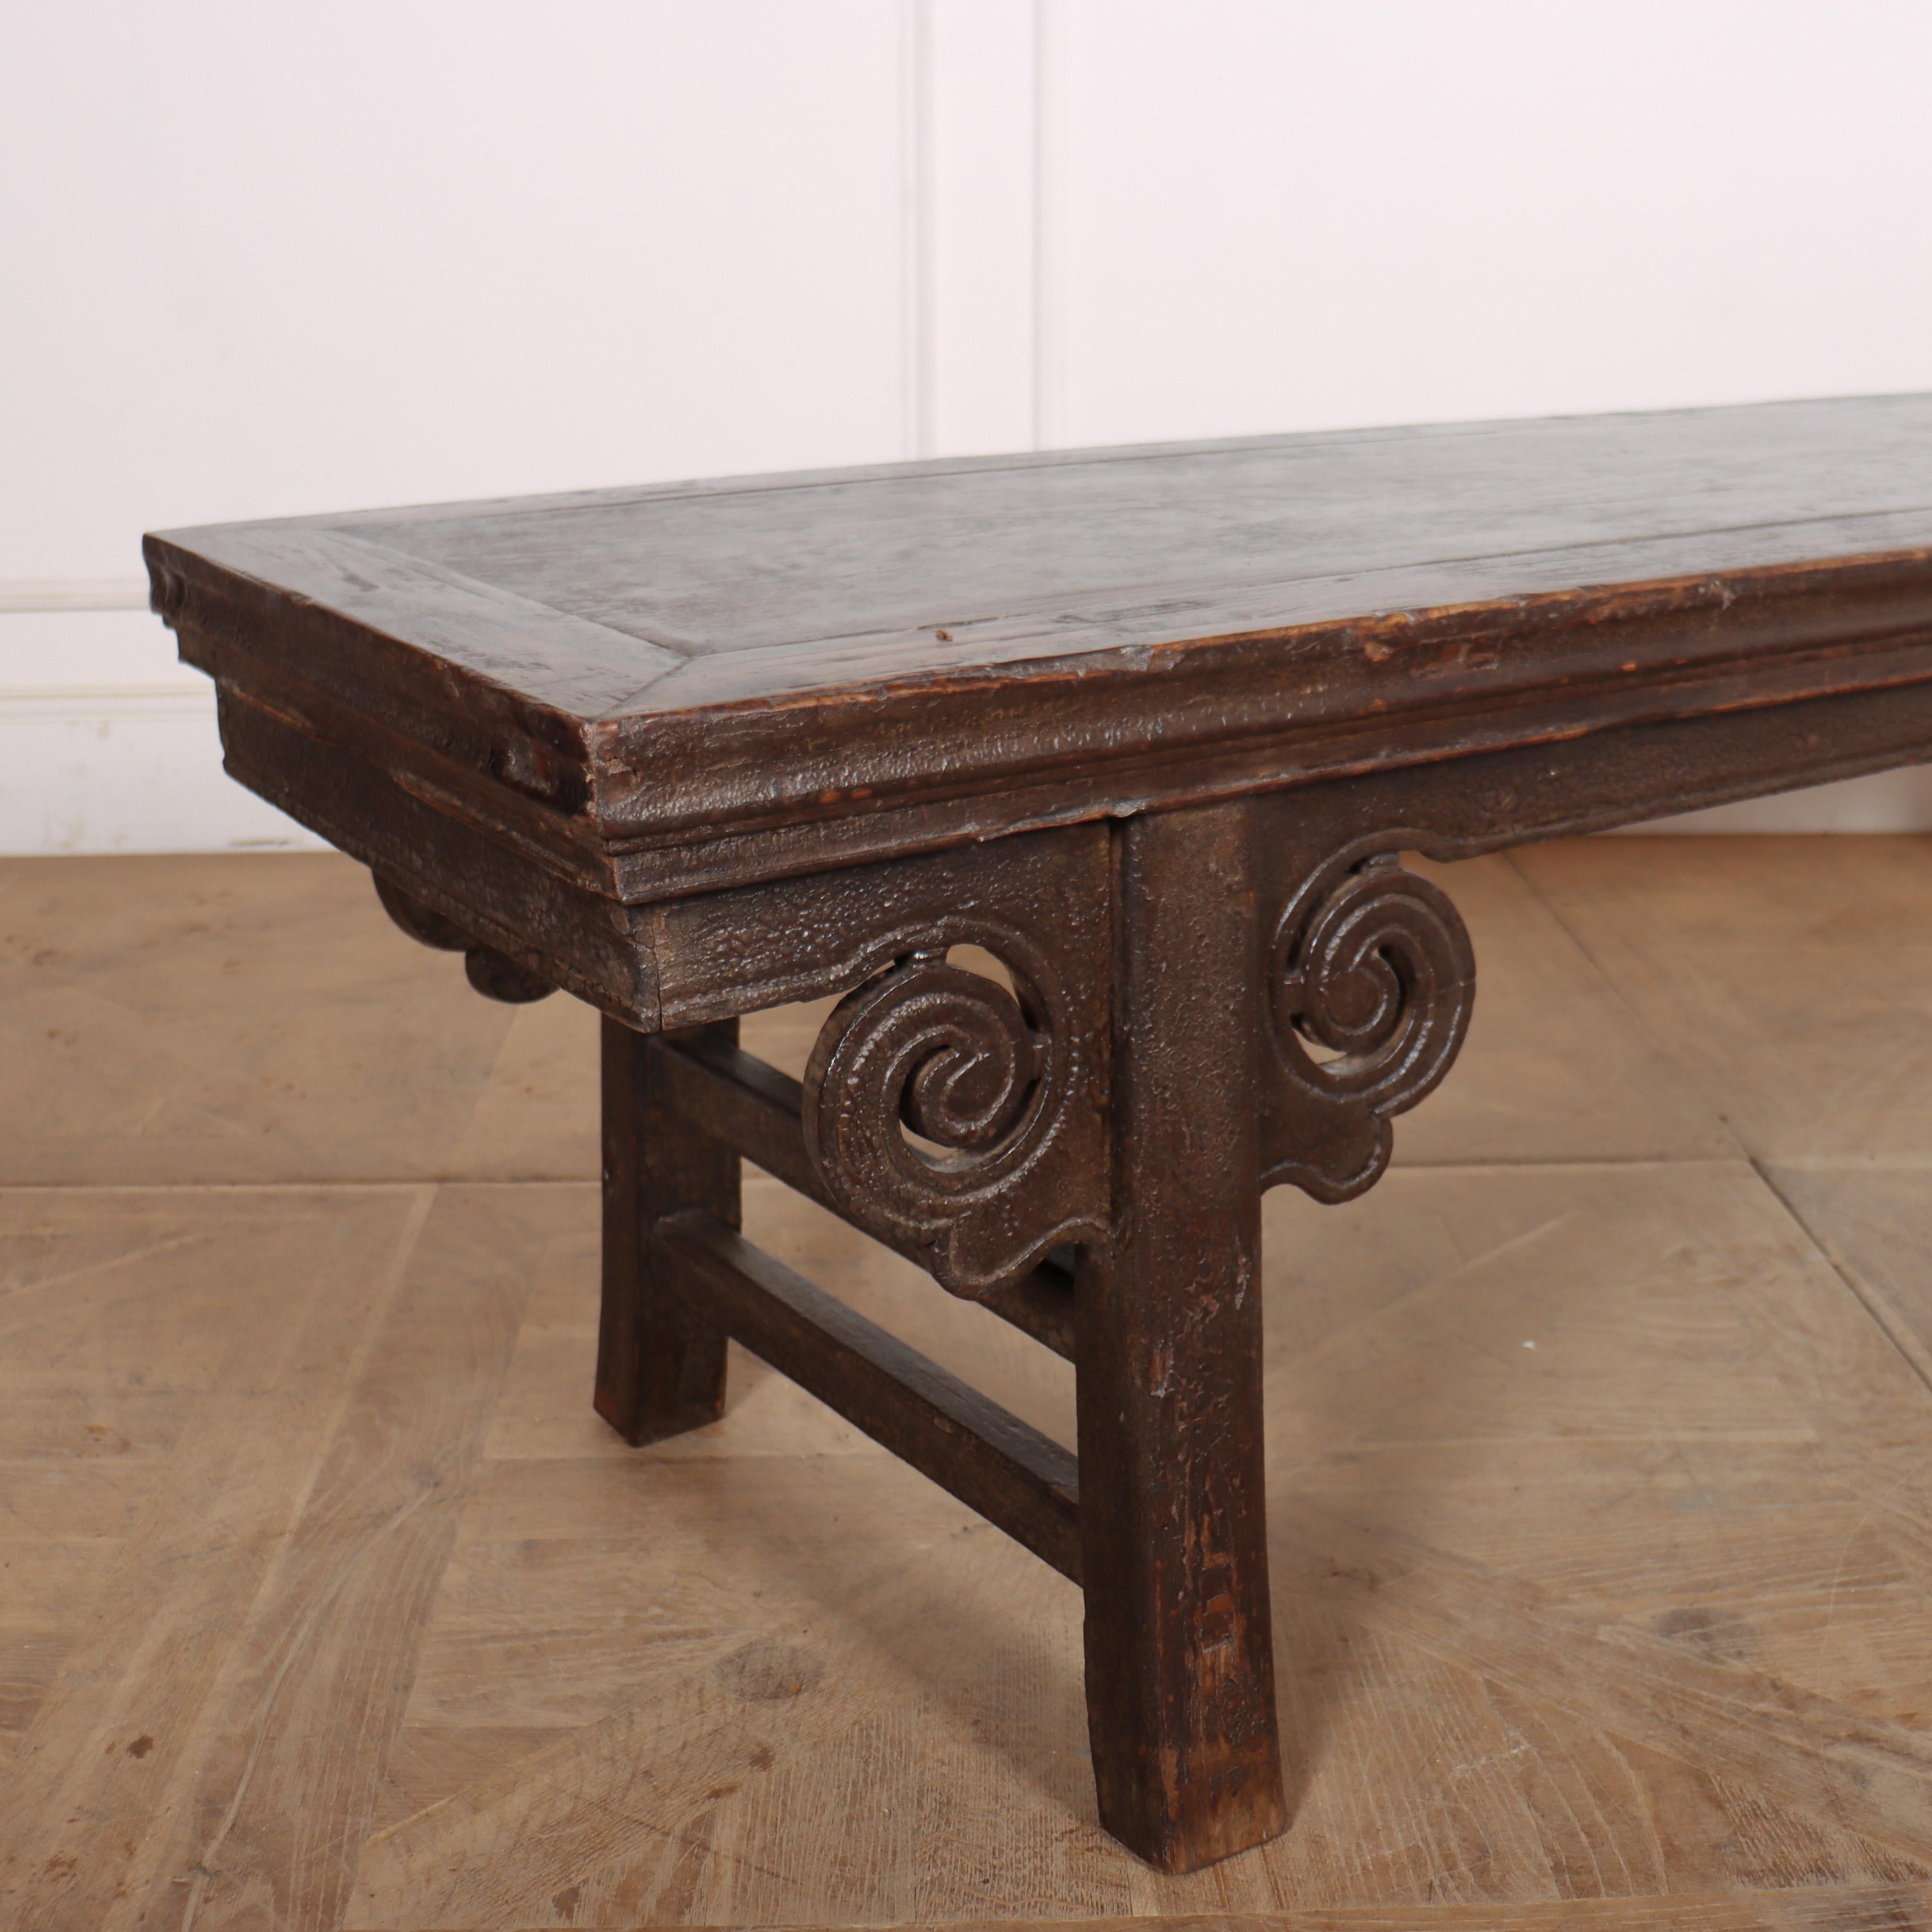 Funky 19th C Asian elm low table / bench. Good colour. 1890.

Reference: 8398

Dimensions
77.5 inches (197 cms) Wide
20.5 inches (52 cms) Deep
21 inches (53 cms) High